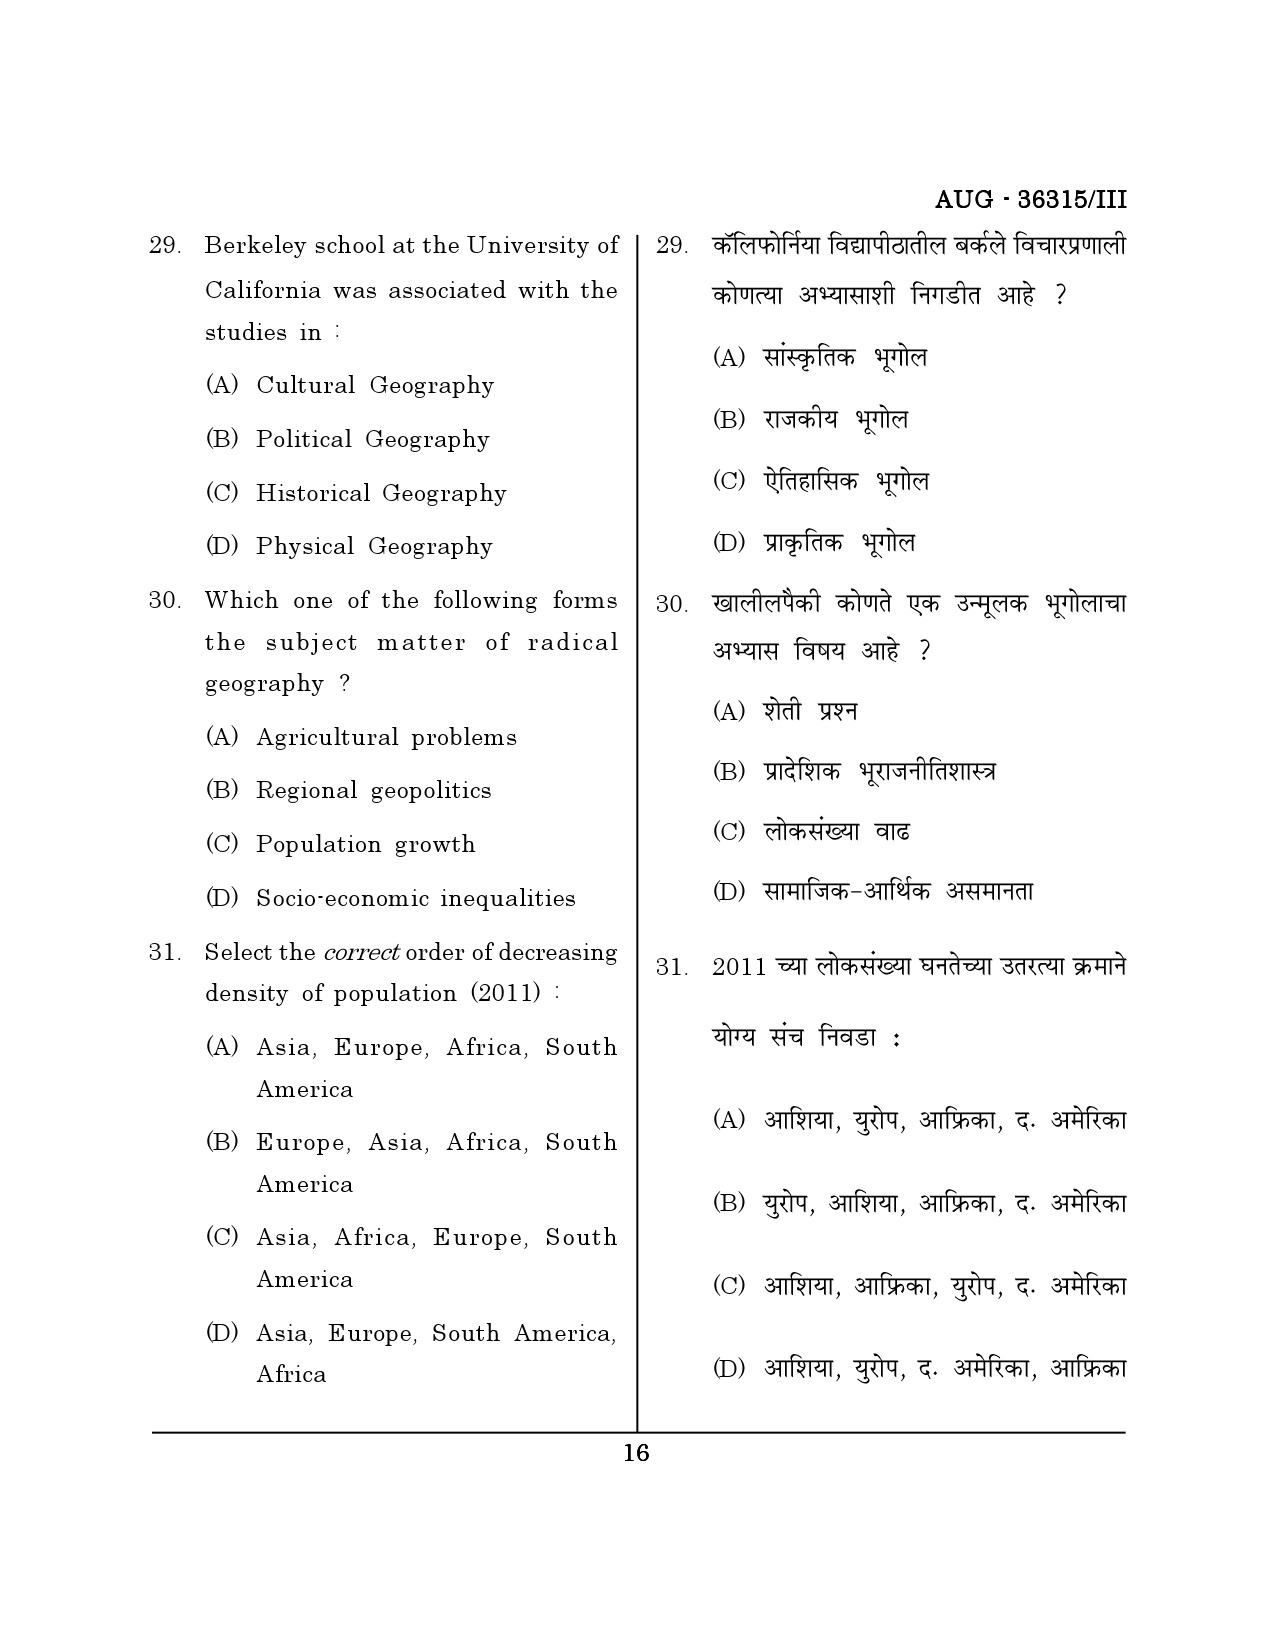 Maharashtra SET Geography Question Paper III August 2015 15